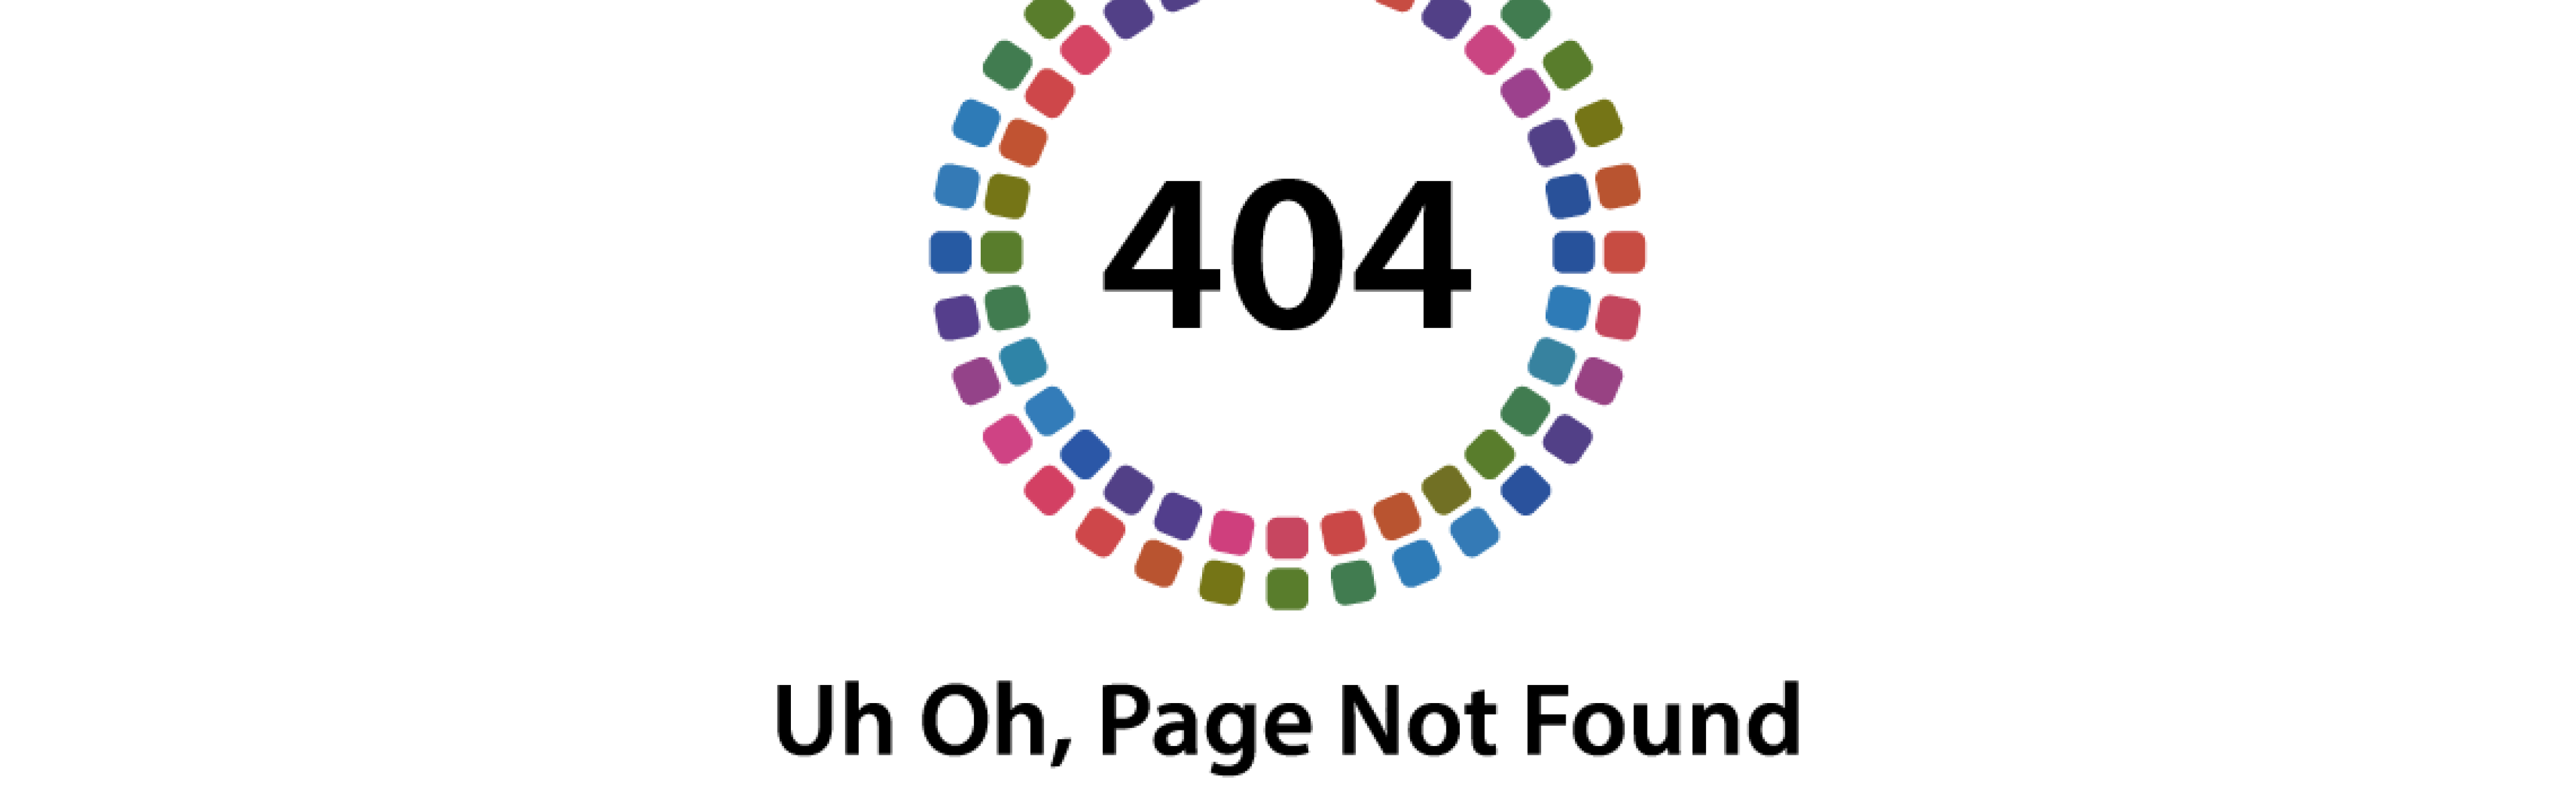 404 Uh oh, Page Not Found